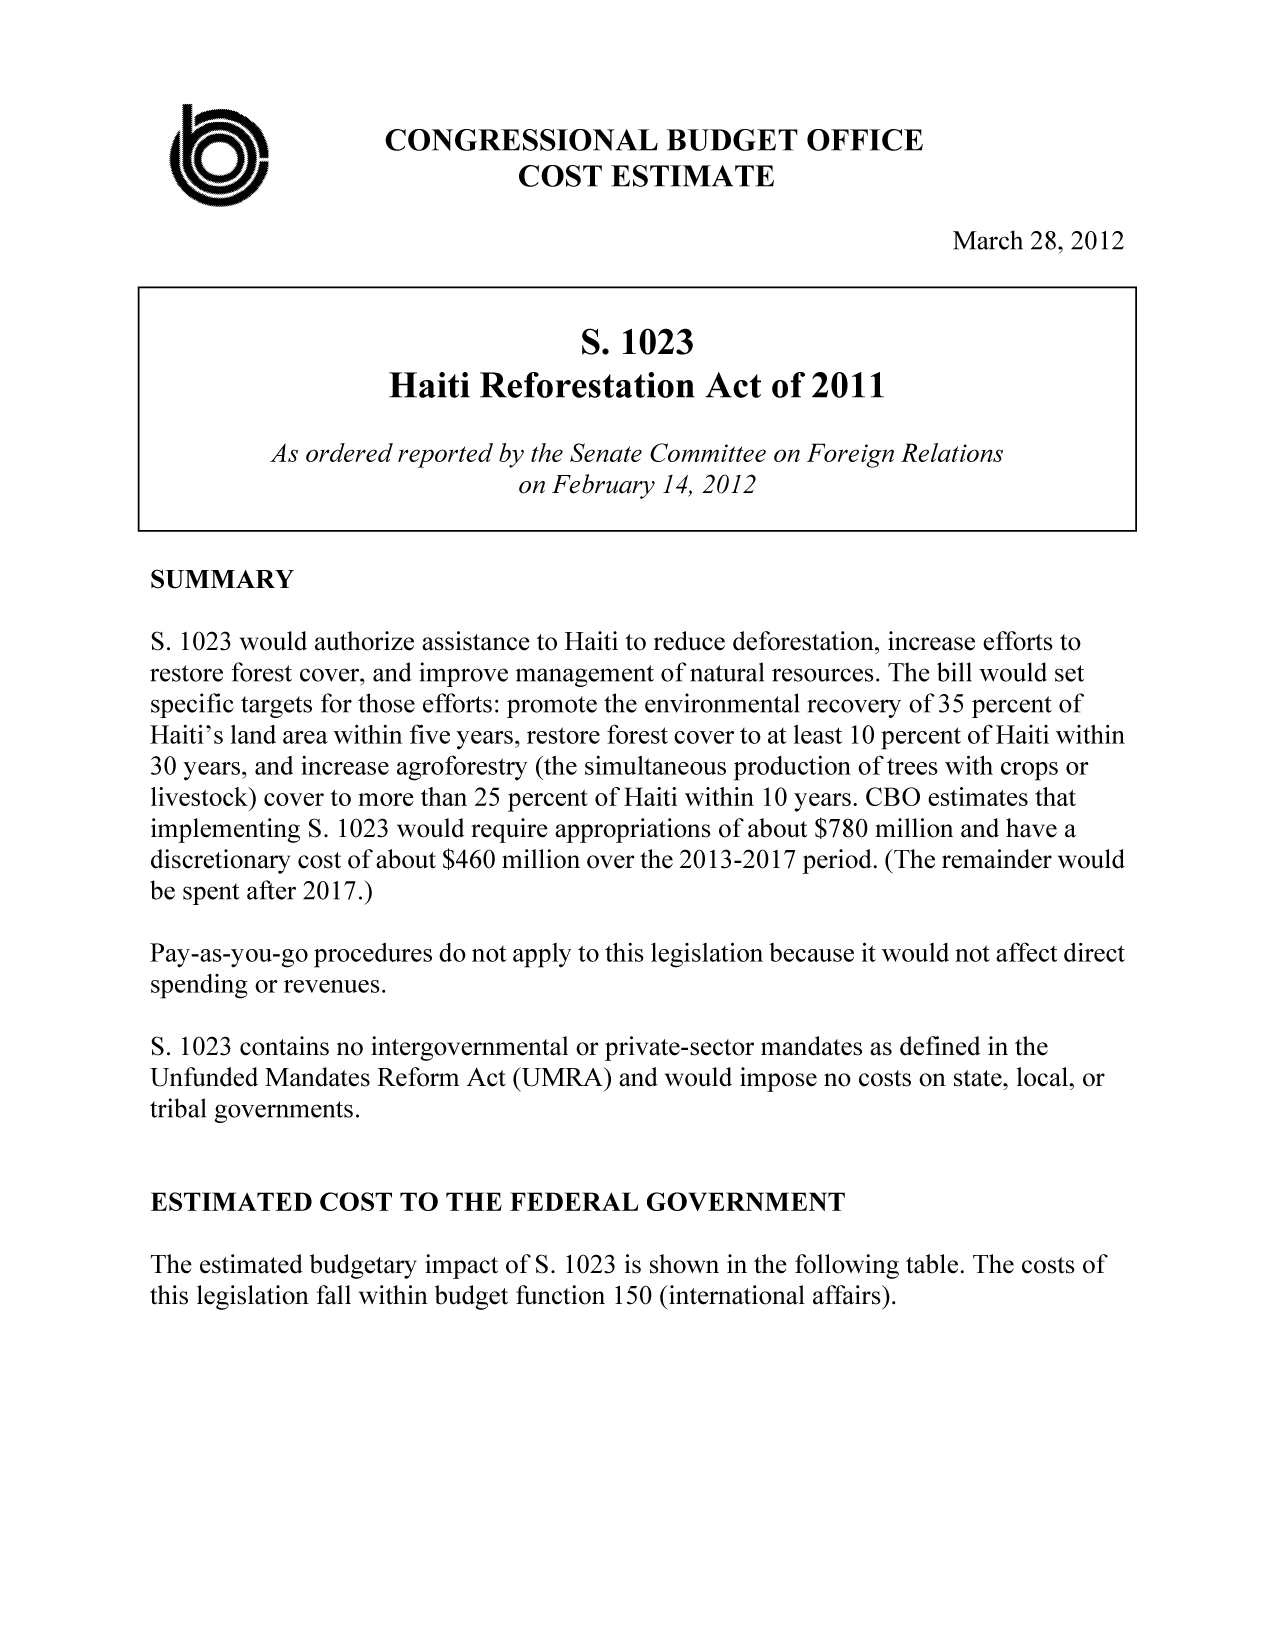 handle is hein.congrec/cbo10692 and id is 1 raw text is: CONGRESSIONAL BUDGET OFFICE
COST ESTIMATE
March 28, 2012
S. 1023
Haiti Reforestation Act of 2011
As ordered reported by the Senate Committee on Foreign Relations
on February 14, 2012
SUMMARY
S. 1023 would authorize assistance to Haiti to reduce deforestation, increase efforts to
restore forest cover, and improve management of natural resources. The bill would set
specific targets for those efforts: promote the environmental recovery of 35 percent of
Haiti's land area within five years, restore forest cover to at least 10 percent of Haiti within
30 years, and increase agroforestry (the simultaneous production of trees with crops or
livestock) cover to more than 25 percent of Haiti within 10 years. CBO estimates that
implementing S. 1023 would require appropriations of about $780 million and have a
discretionary cost of about $460 million over the 2013-2017 period. (The remainder would
be spent after 2017.)
Pay-as-you-go procedures do not apply to this legislation because it would not affect direct
spending or revenues.
S. 1023 contains no intergovernmental or private-sector mandates as defined in the
Unfunded Mandates Reform Act (UMRA) and would impose no costs on state, local, or
tribal governments.
ESTIMATED COST TO THE FEDERAL GOVERNMENT
The estimated budgetary impact of S. 1023 is shown in the following table. The costs of
this legislation fall within budget function 150 (international affairs).


